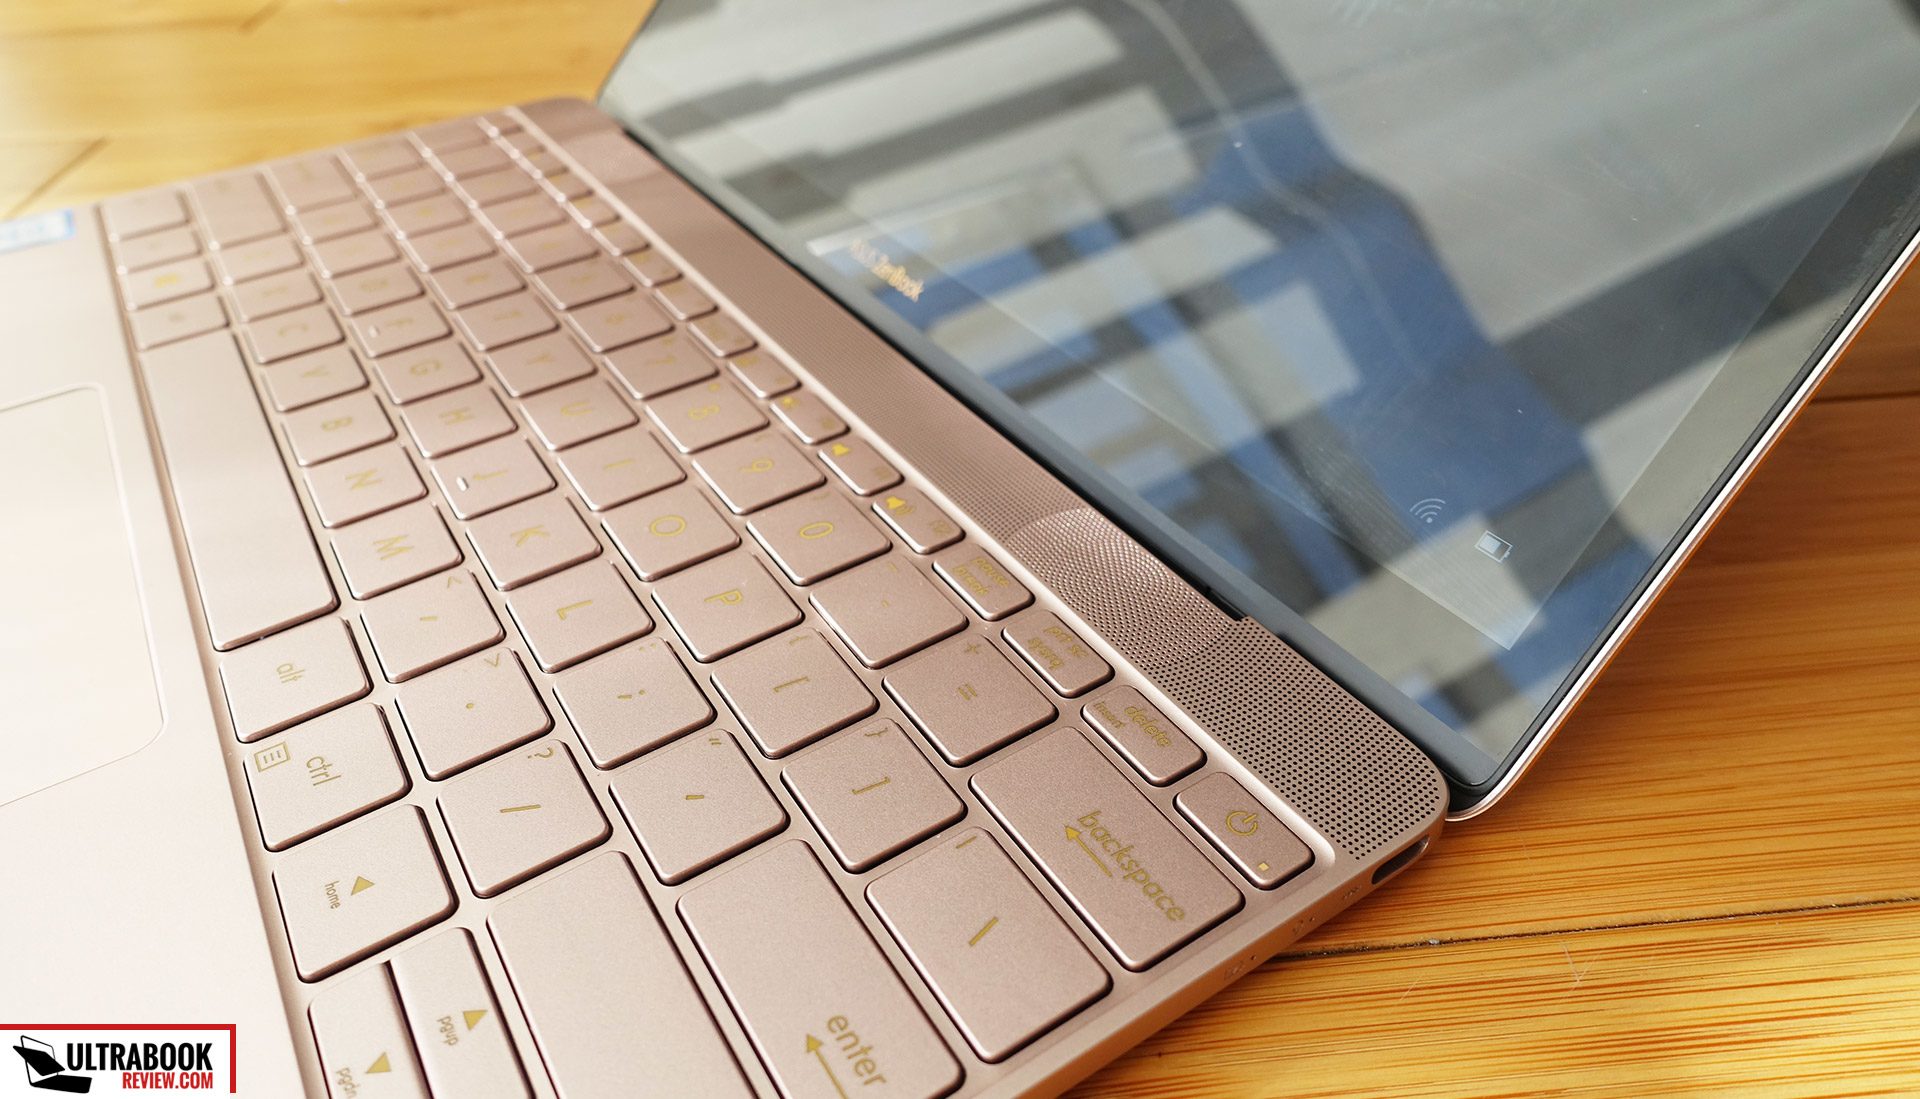 Asus Zenbook 3 UX390UAK (UX390UA series) review - THE ultrabook of this